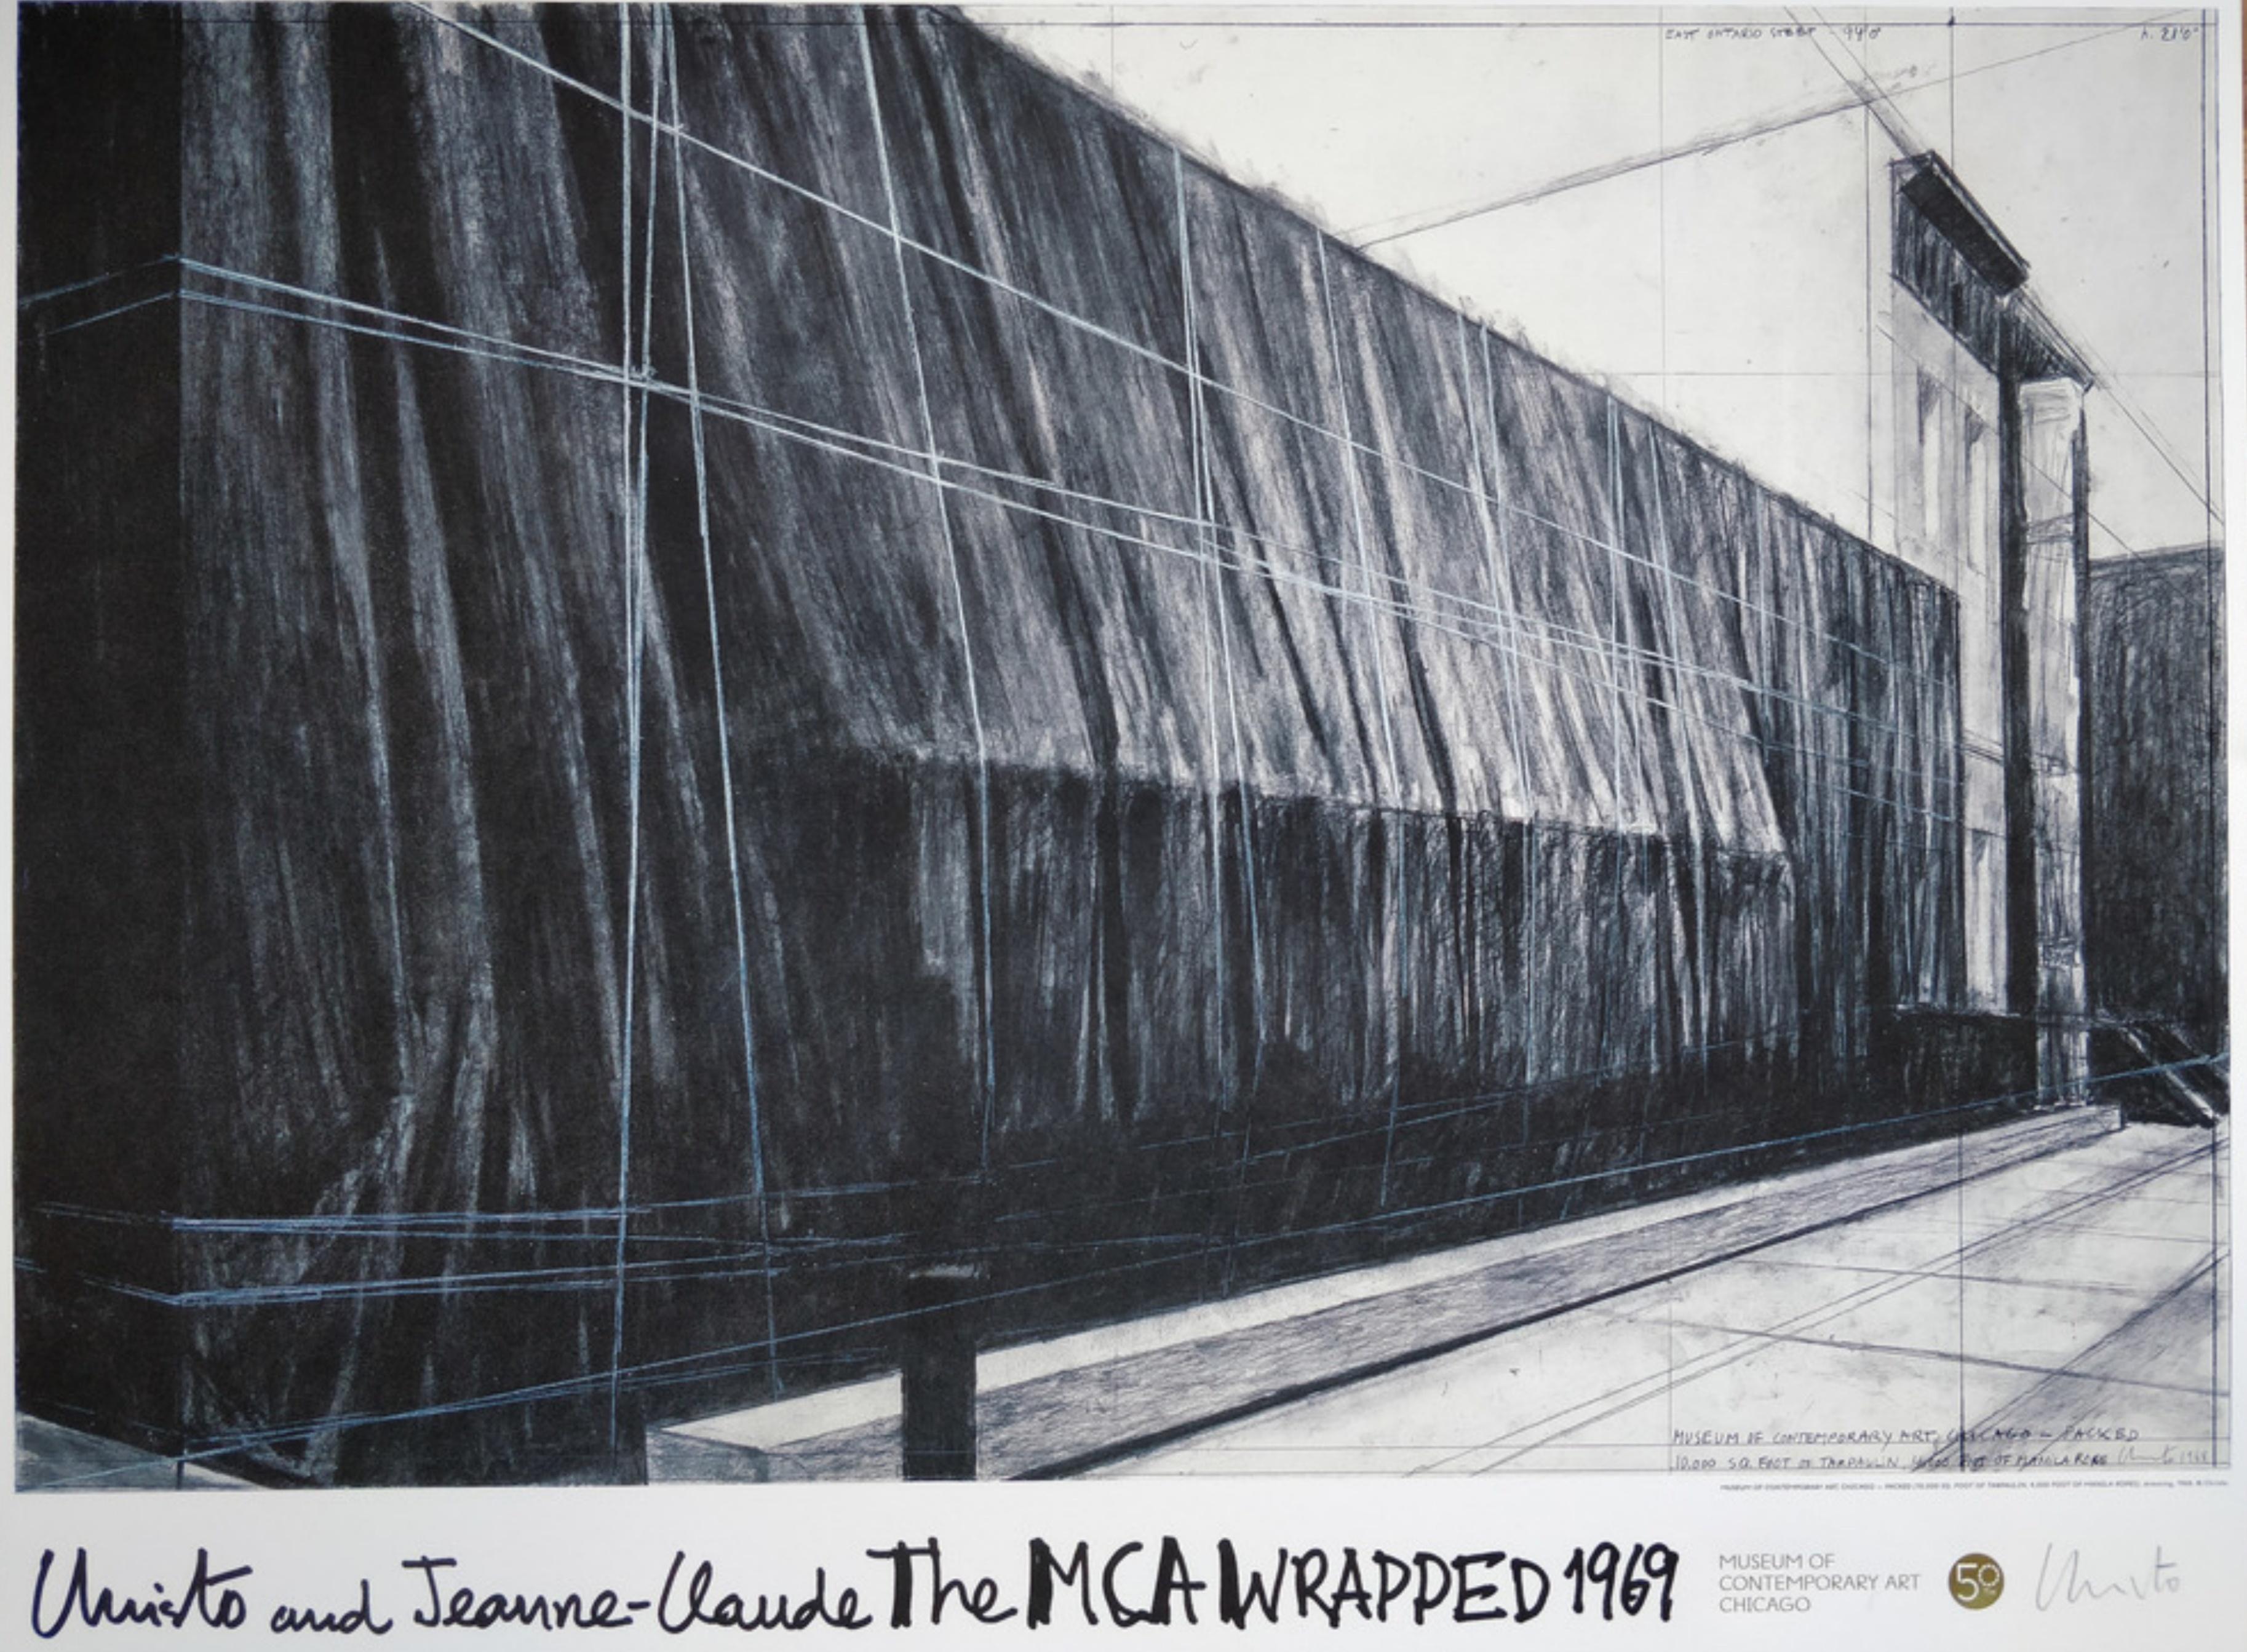 Christo and Jeanne-Claude Abstract Print - The Wrapped (MCA), Chicago 1969 (Limited Edition of 200, Hand Signed by Christo)